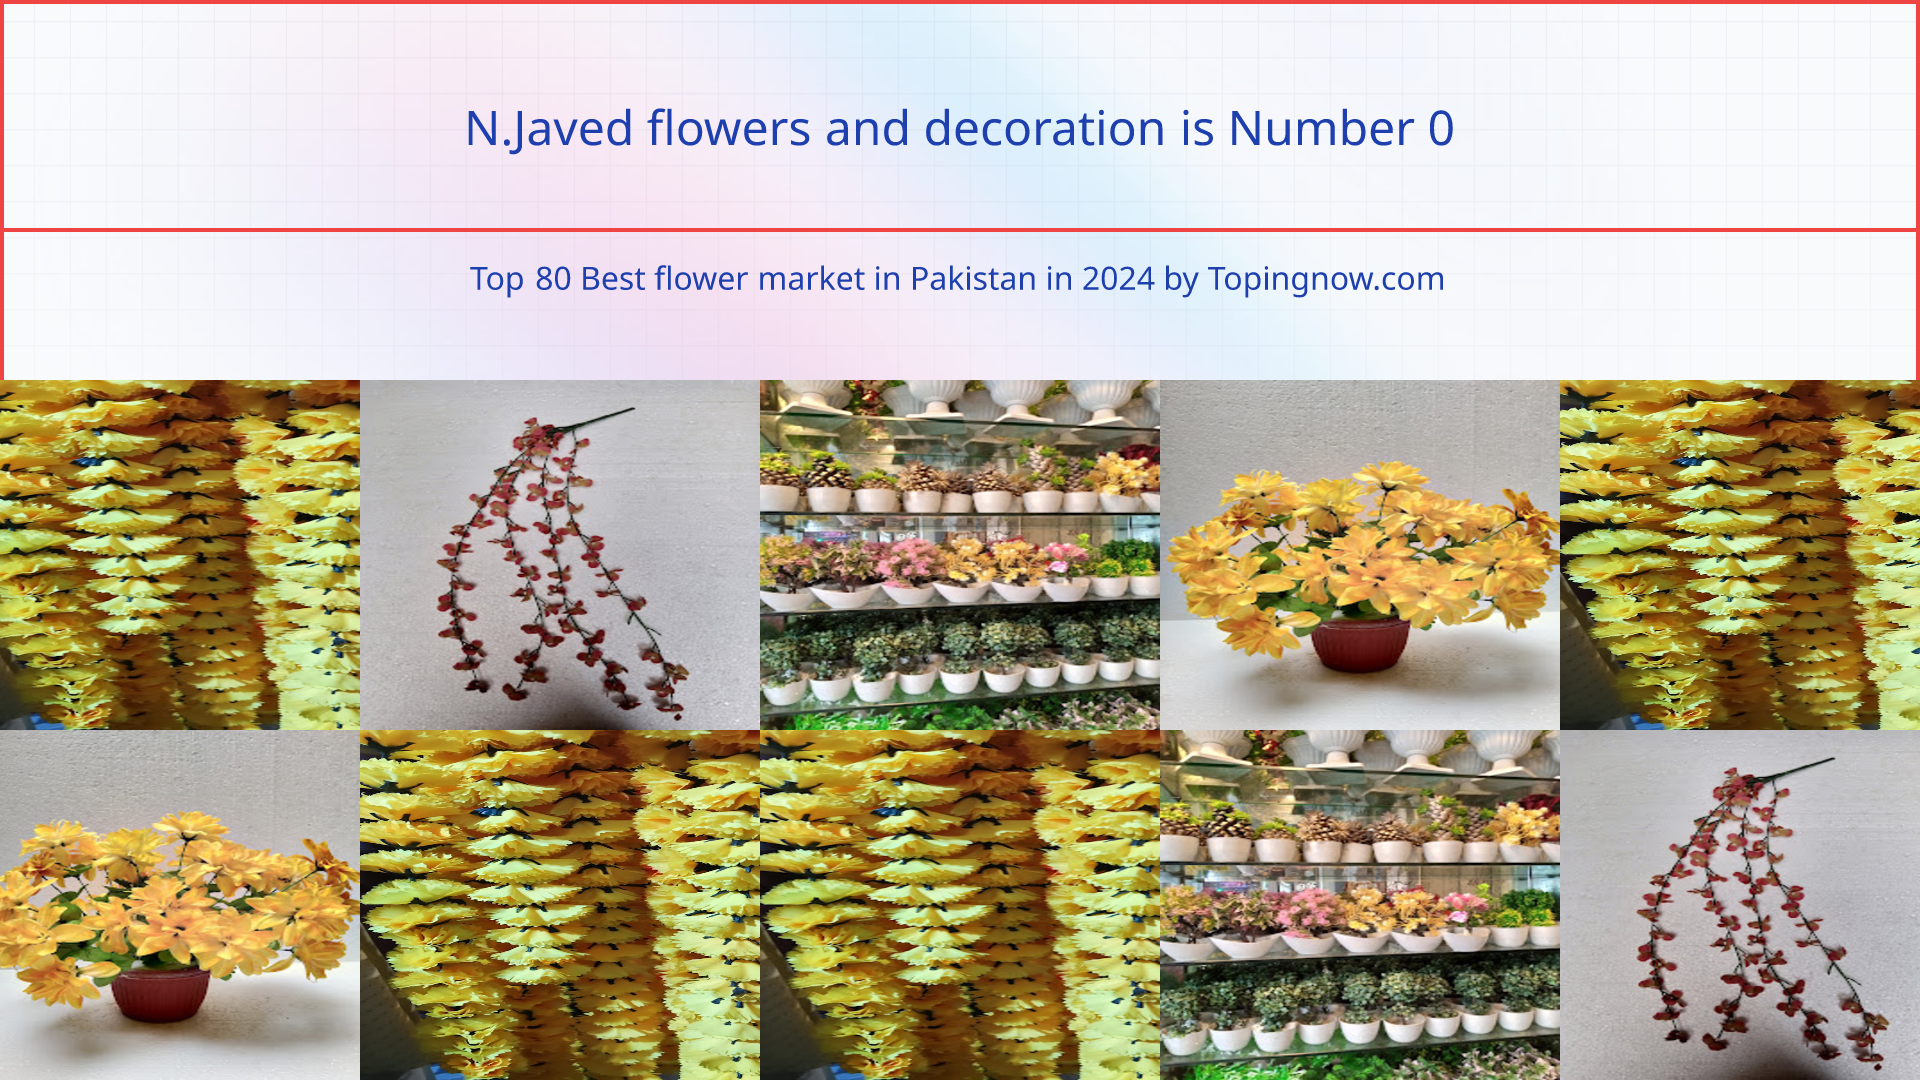 N.Javed flowers and decoration: Top 80 Best flower market in Pakistan in 2024